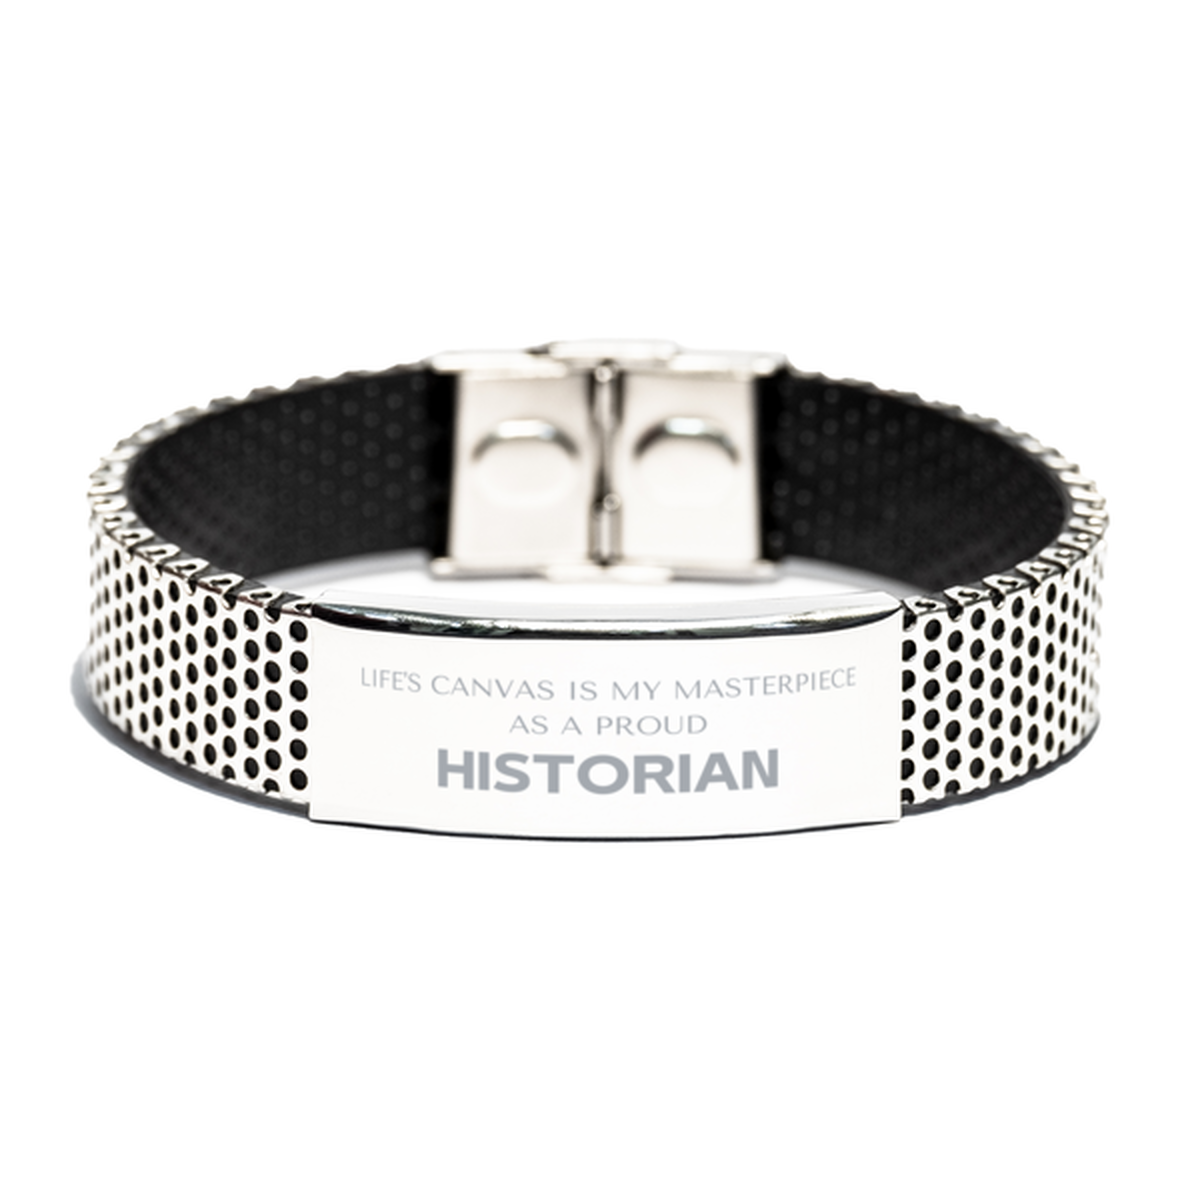 Proud Historian Gifts, Life's canvas is my masterpiece, Epic Birthday Christmas Unique Stainless Steel Bracelet For Historian, Coworkers, Men, Women, Friends